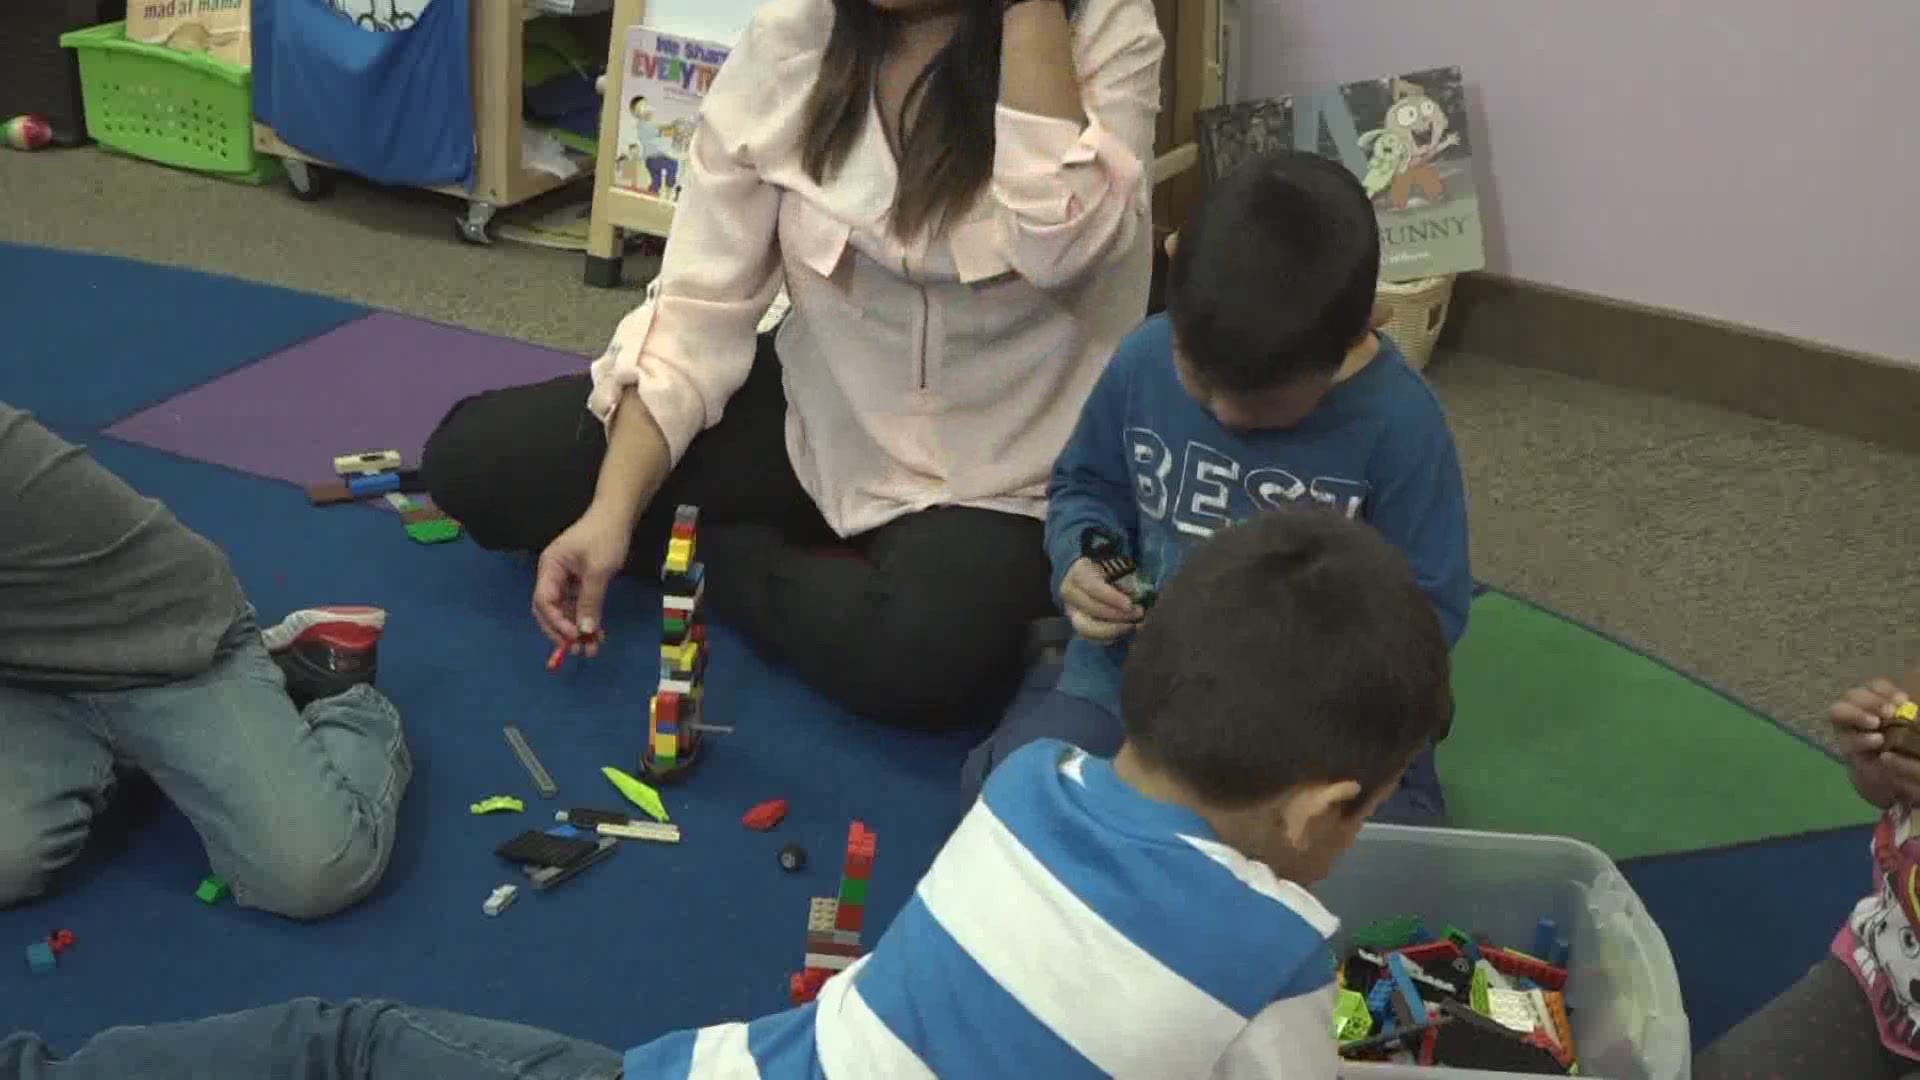 A look at how early education teachers will make sure students are learning.